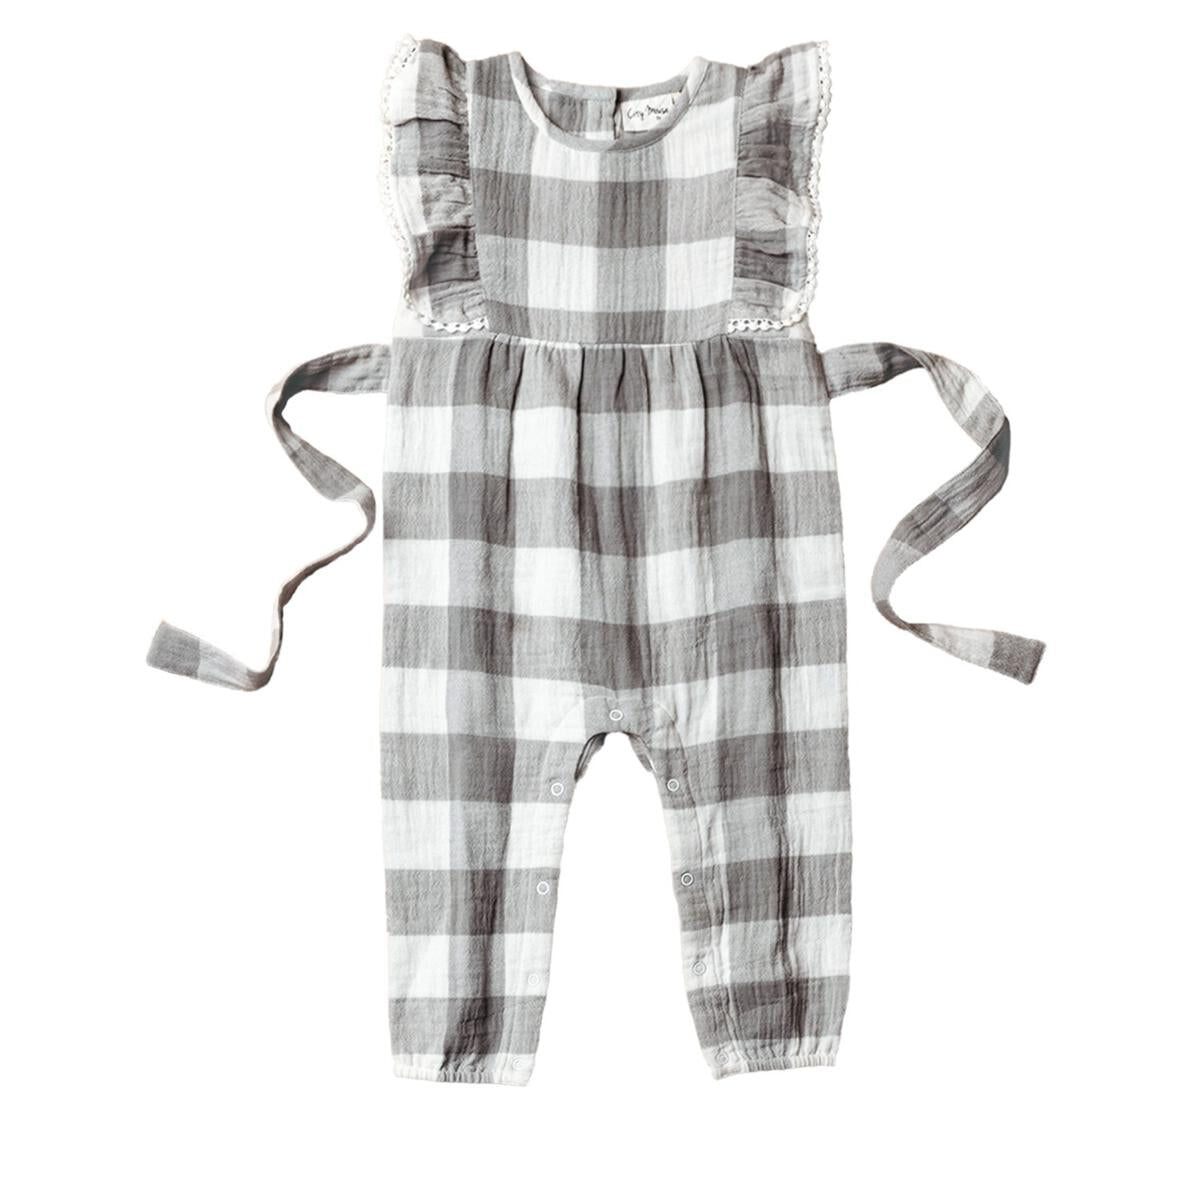 City Mouse - Flutter Long Romper - Crinkle Cotton - Silver Check - LAST ONE - 2Y